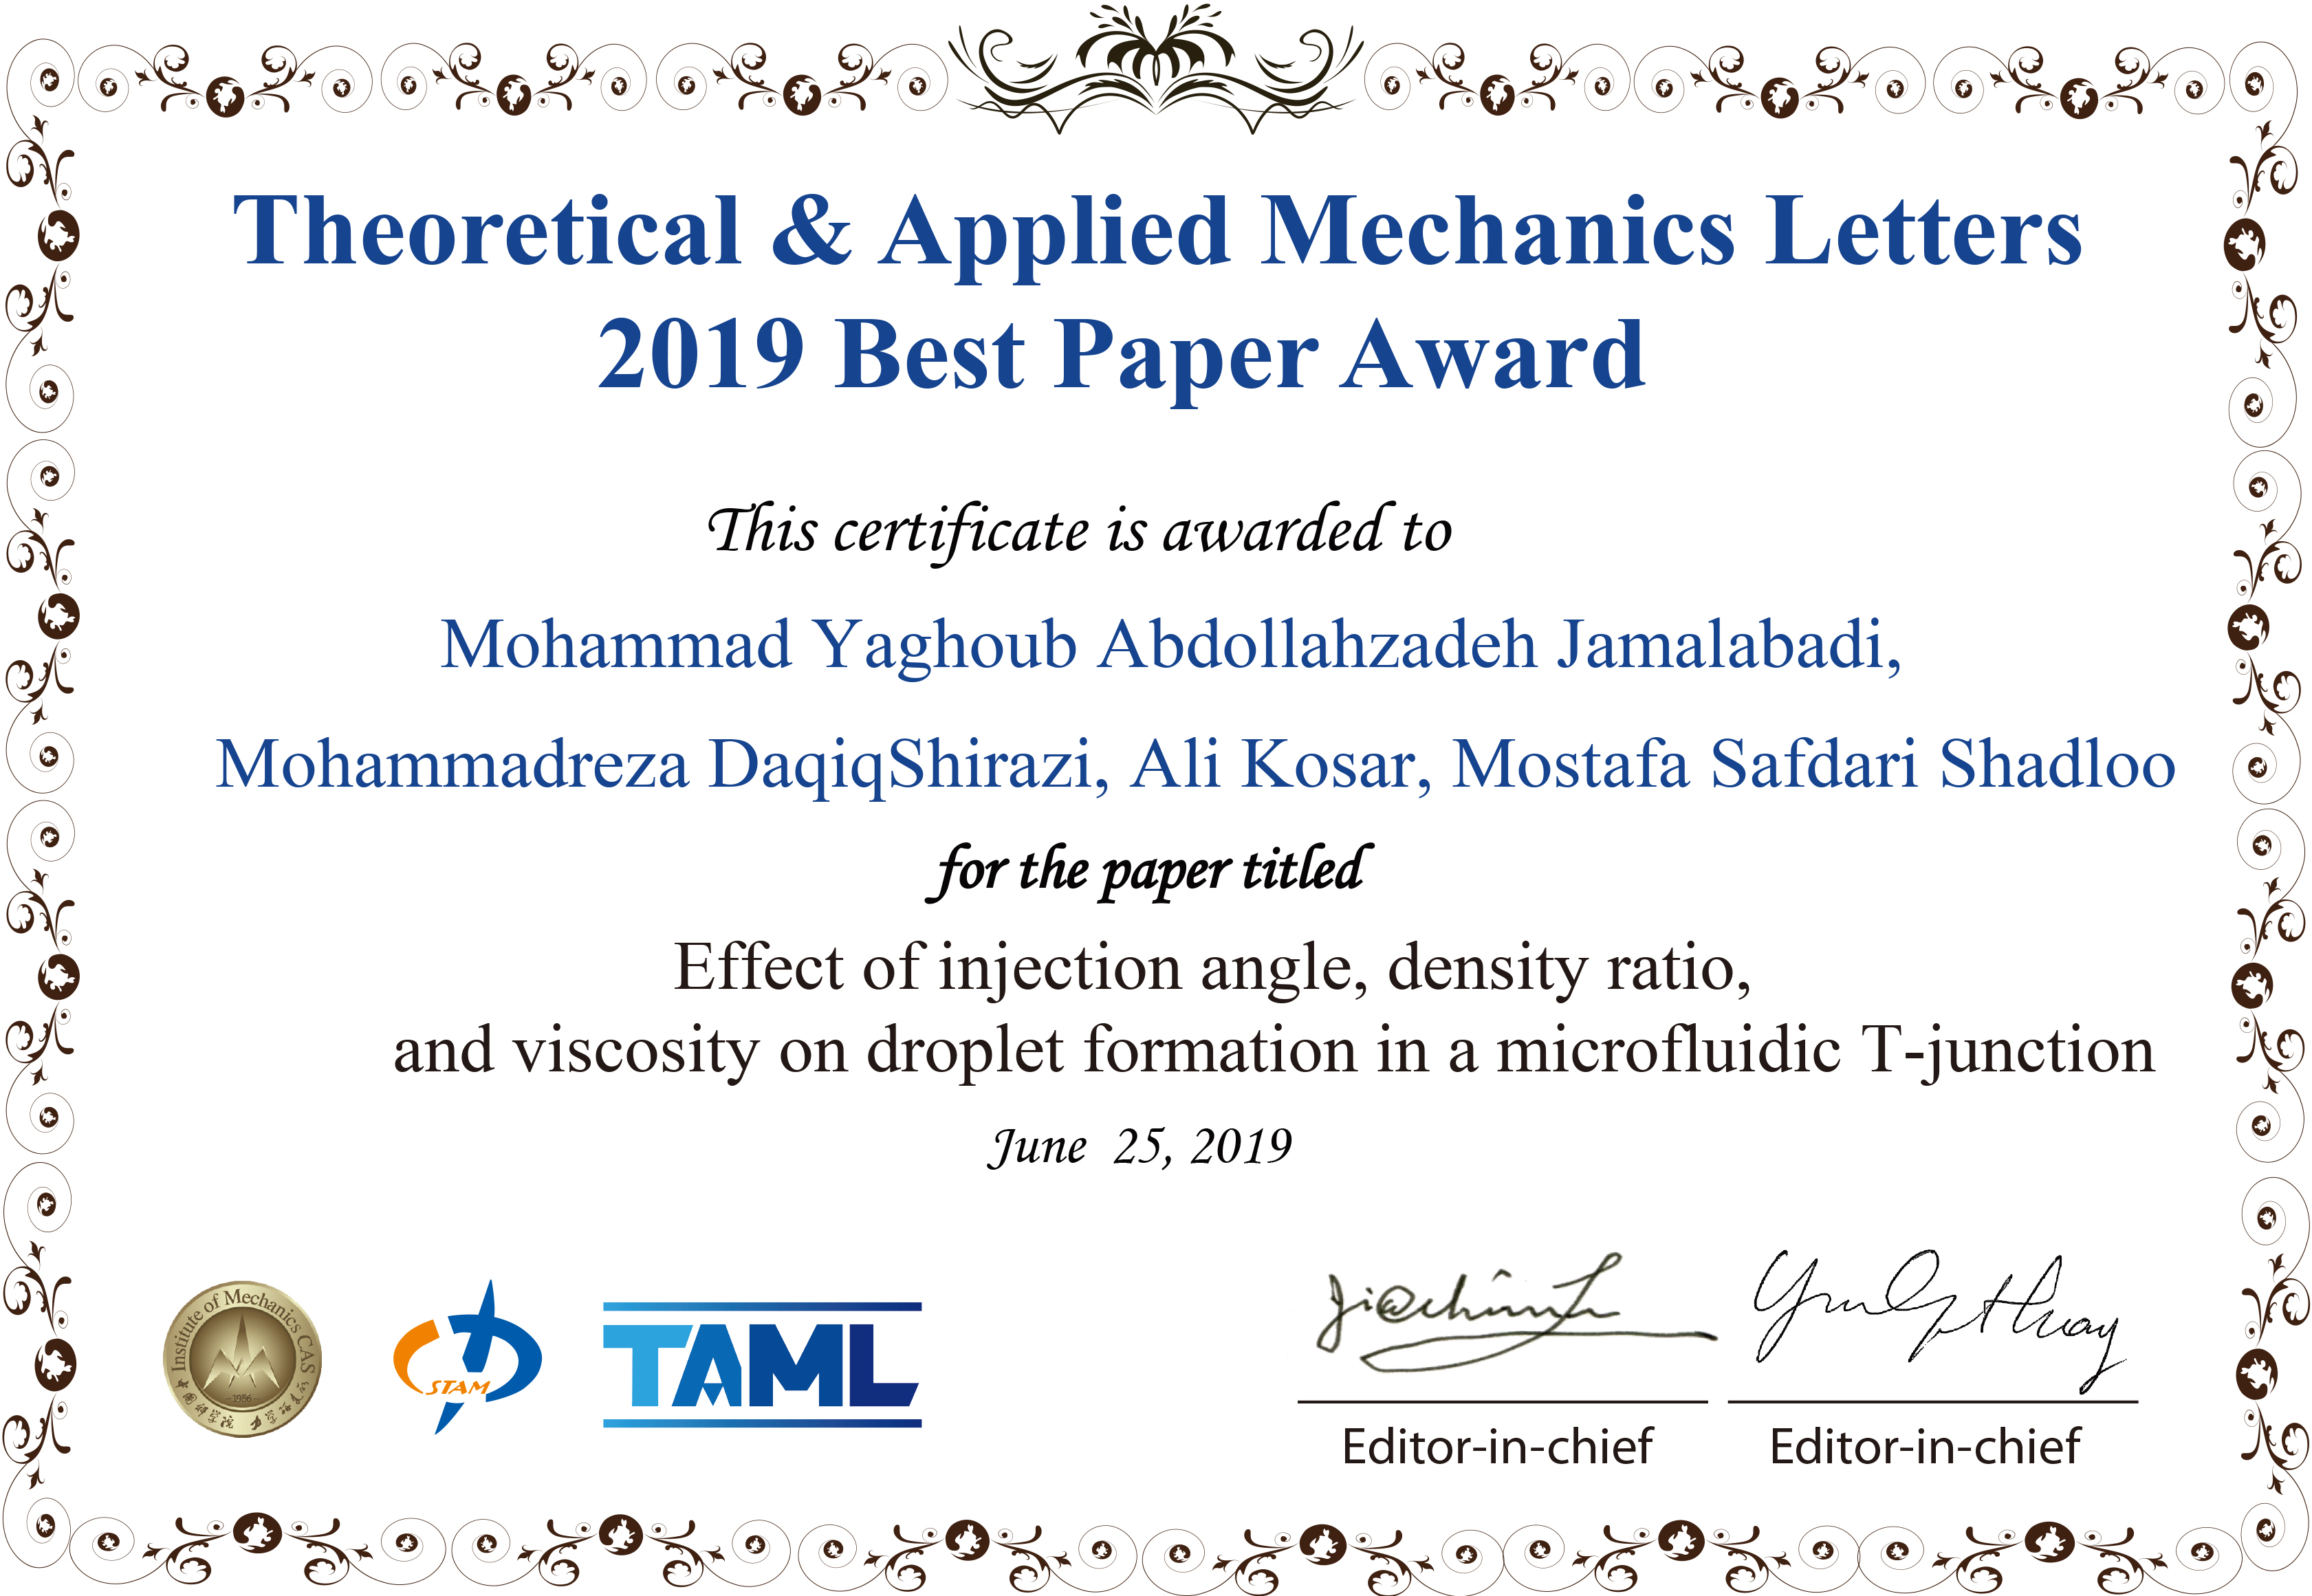 Congratulations to Theoretical and Applied Mechanics Letters 2014 Best Paper Award Winners